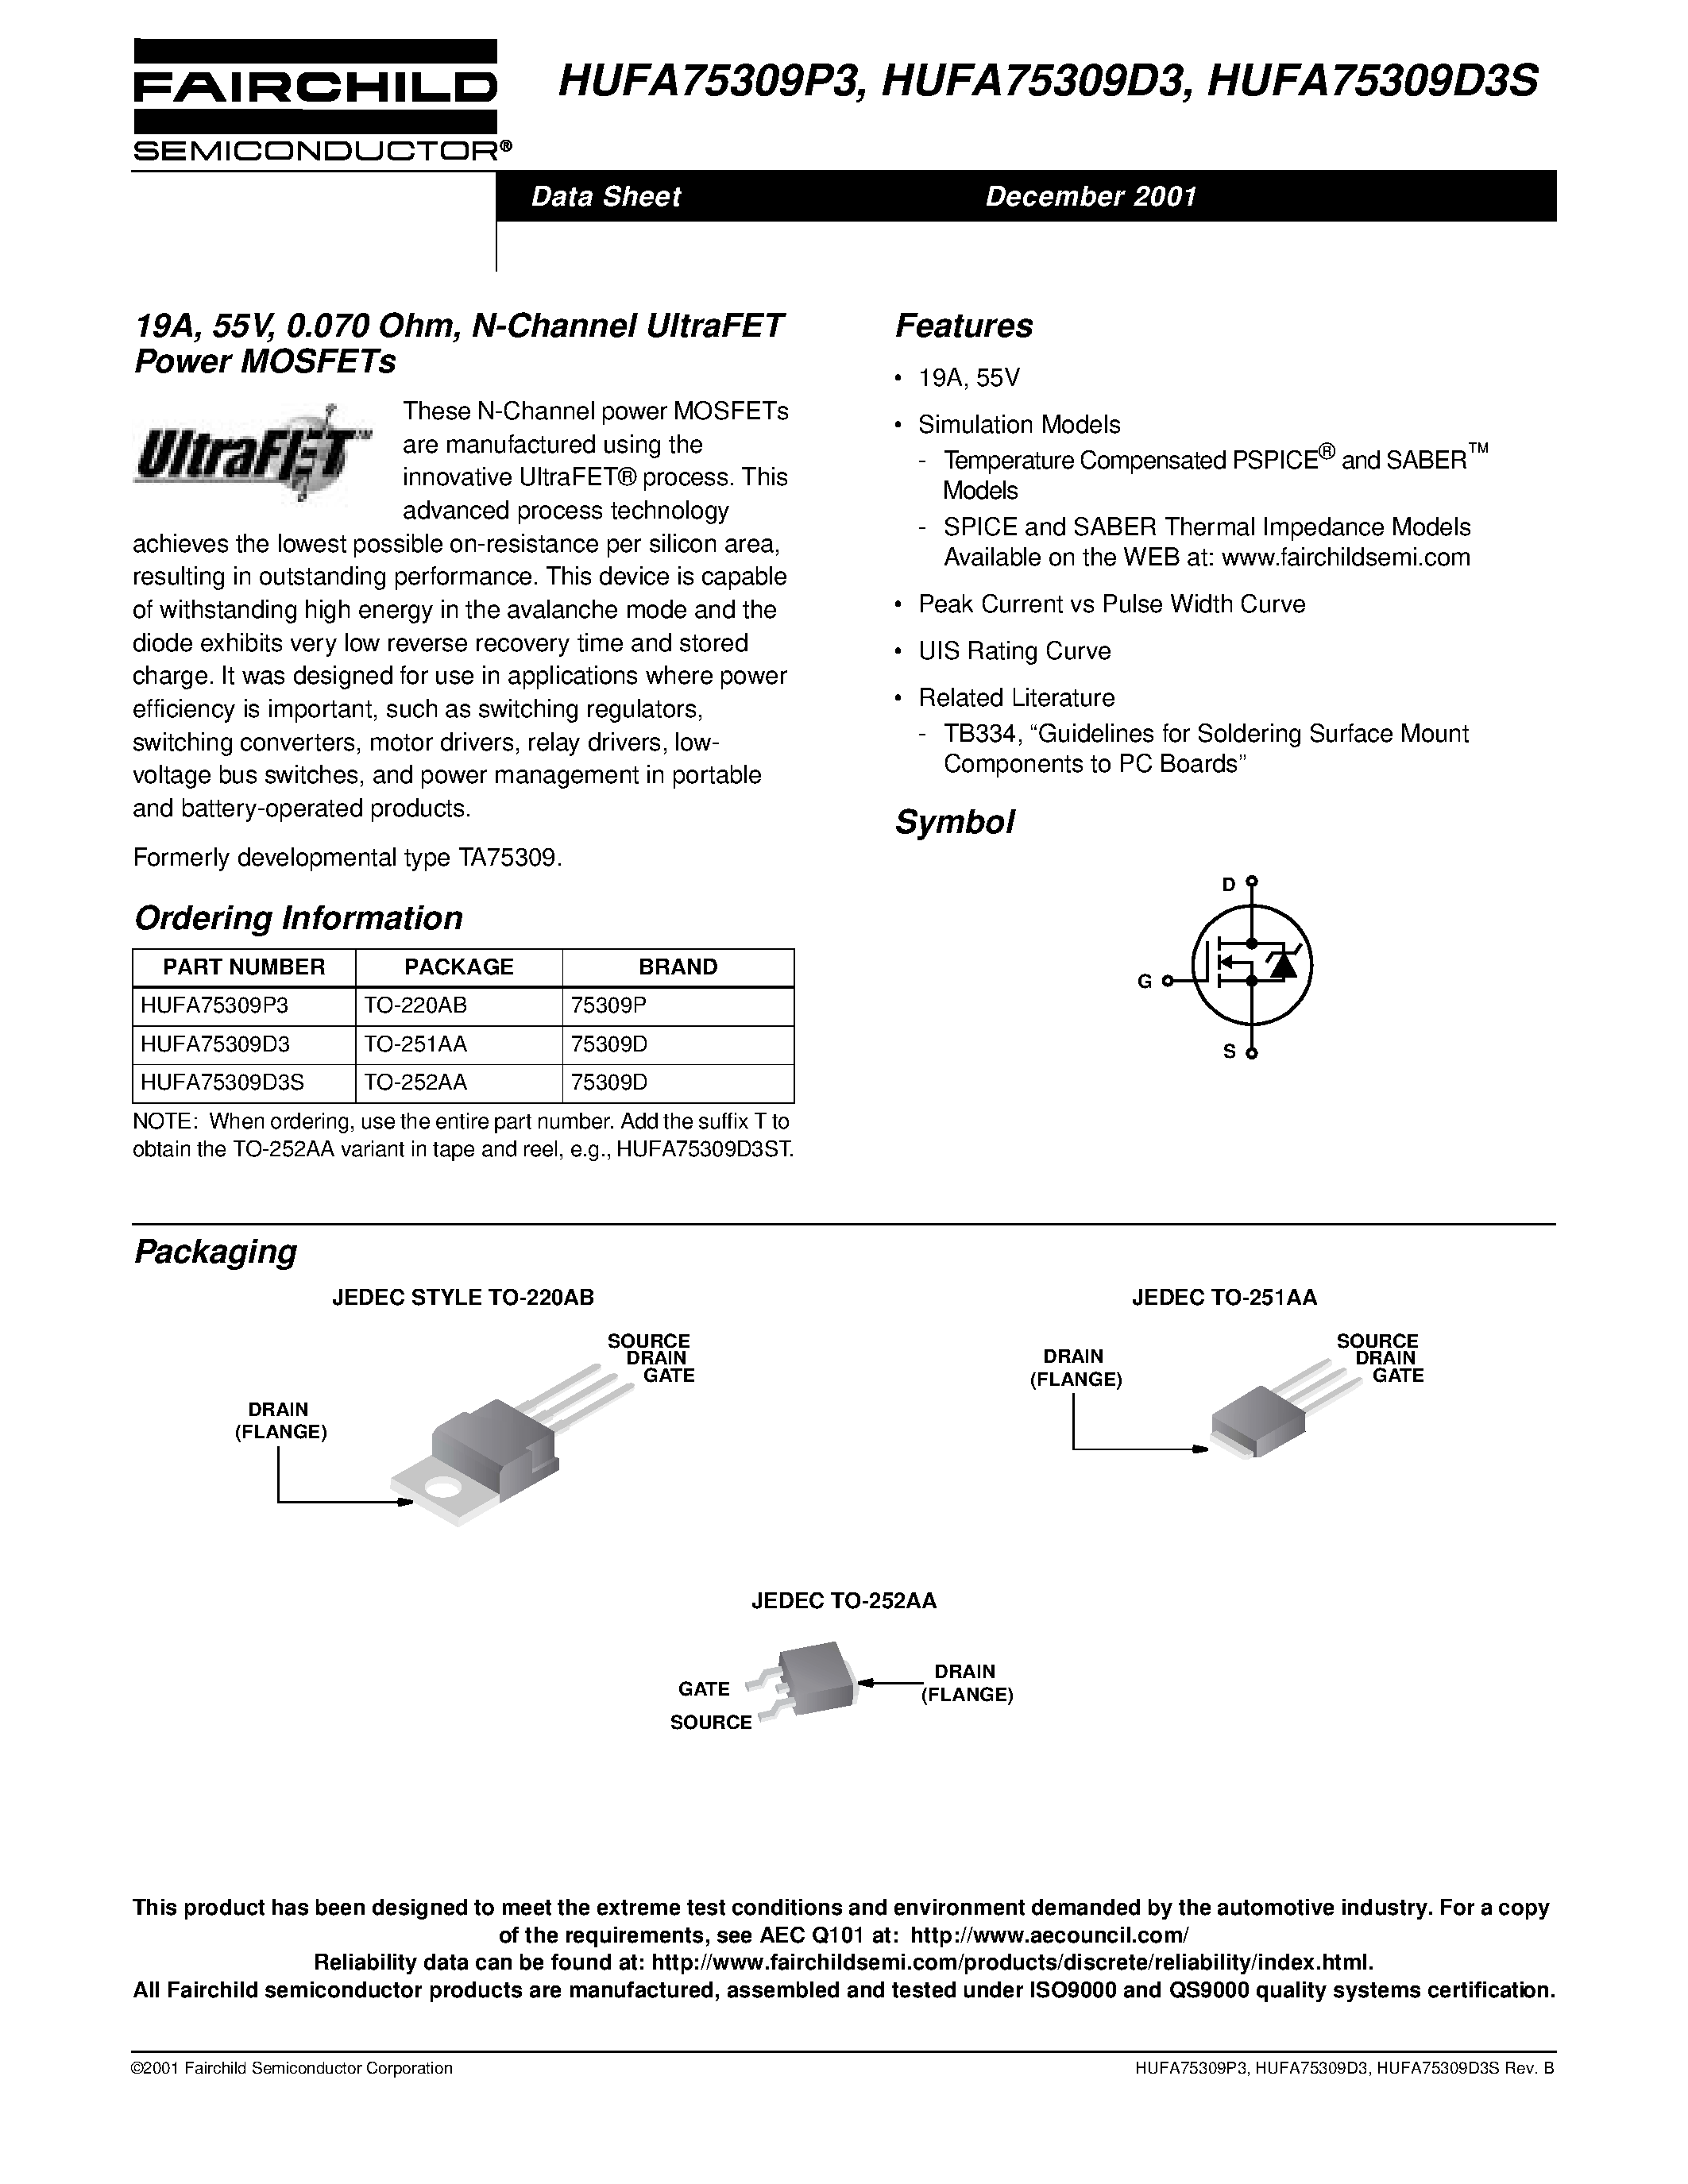 Datasheet HUFA75309D3S - 19A/ 55V/ 0.070 Ohm/ N-Channel UltraFET Power MOSFETs page 1